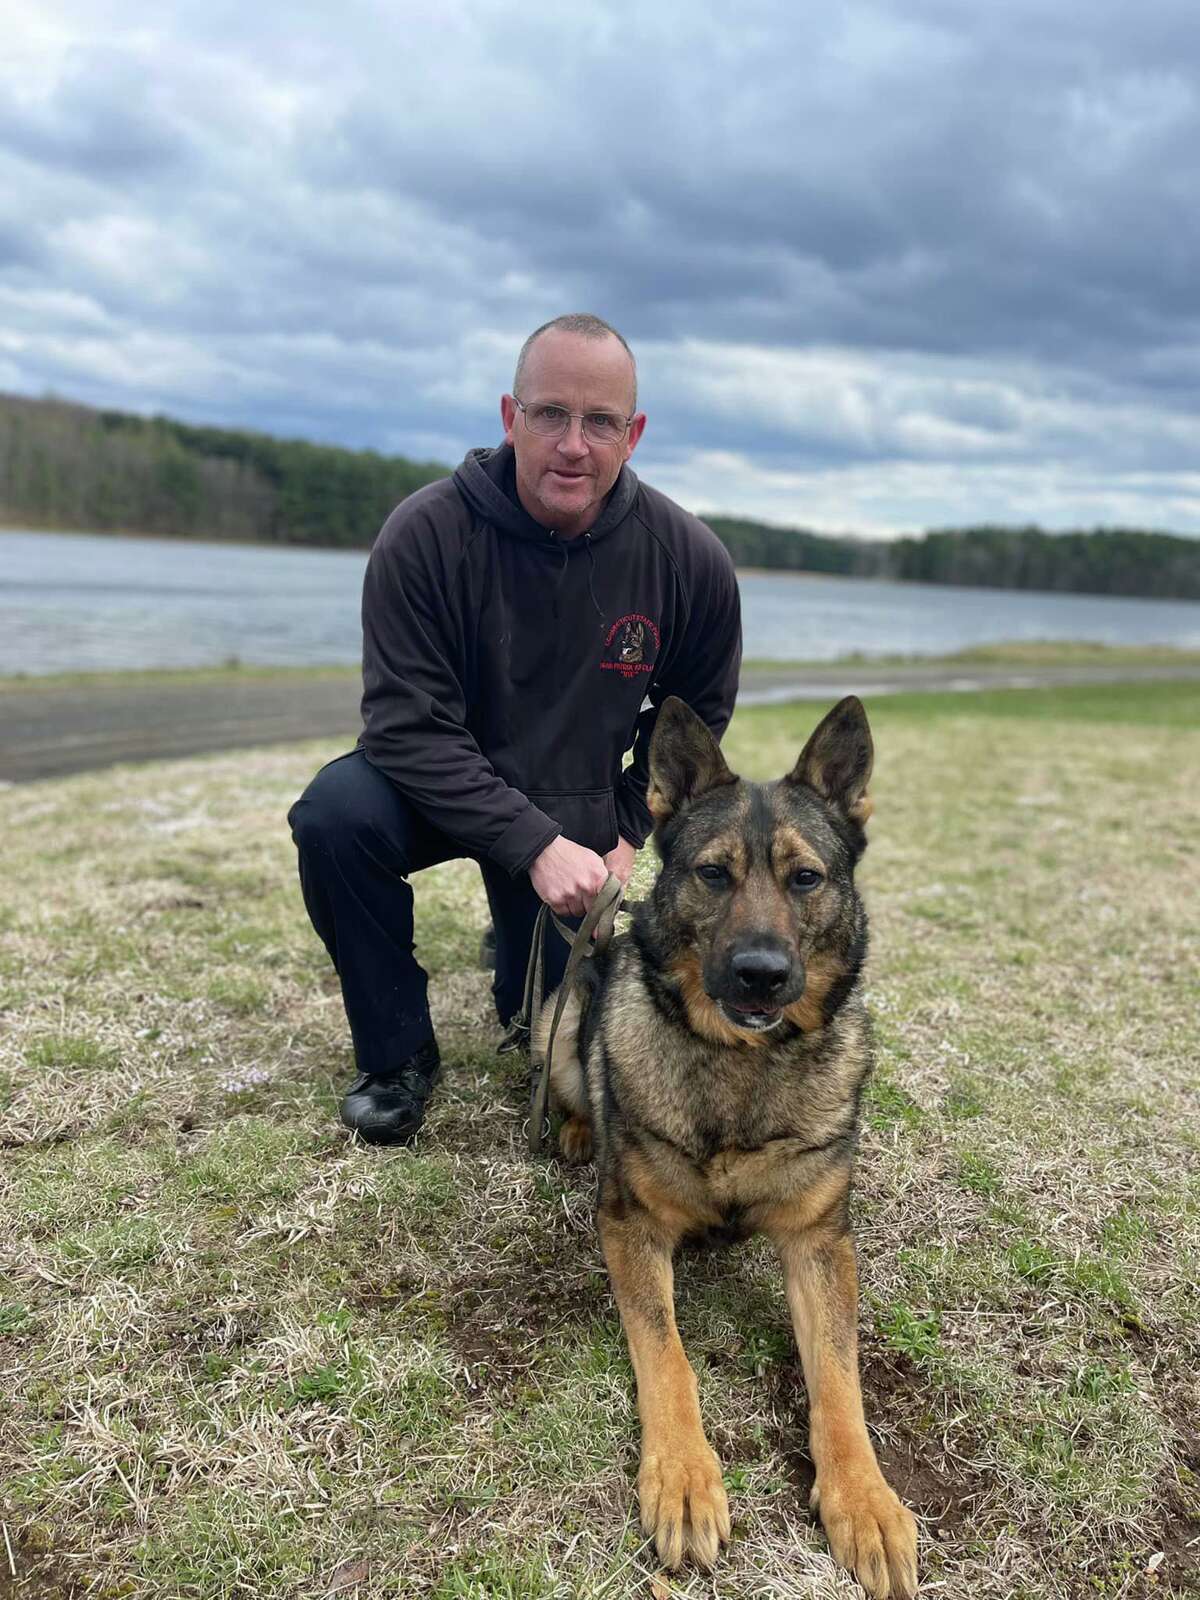 Sgt. Scott Bloom and Ike. Ike is retiring this weekend after helping in more than 1,700 investigations with the West Haven Police Department.